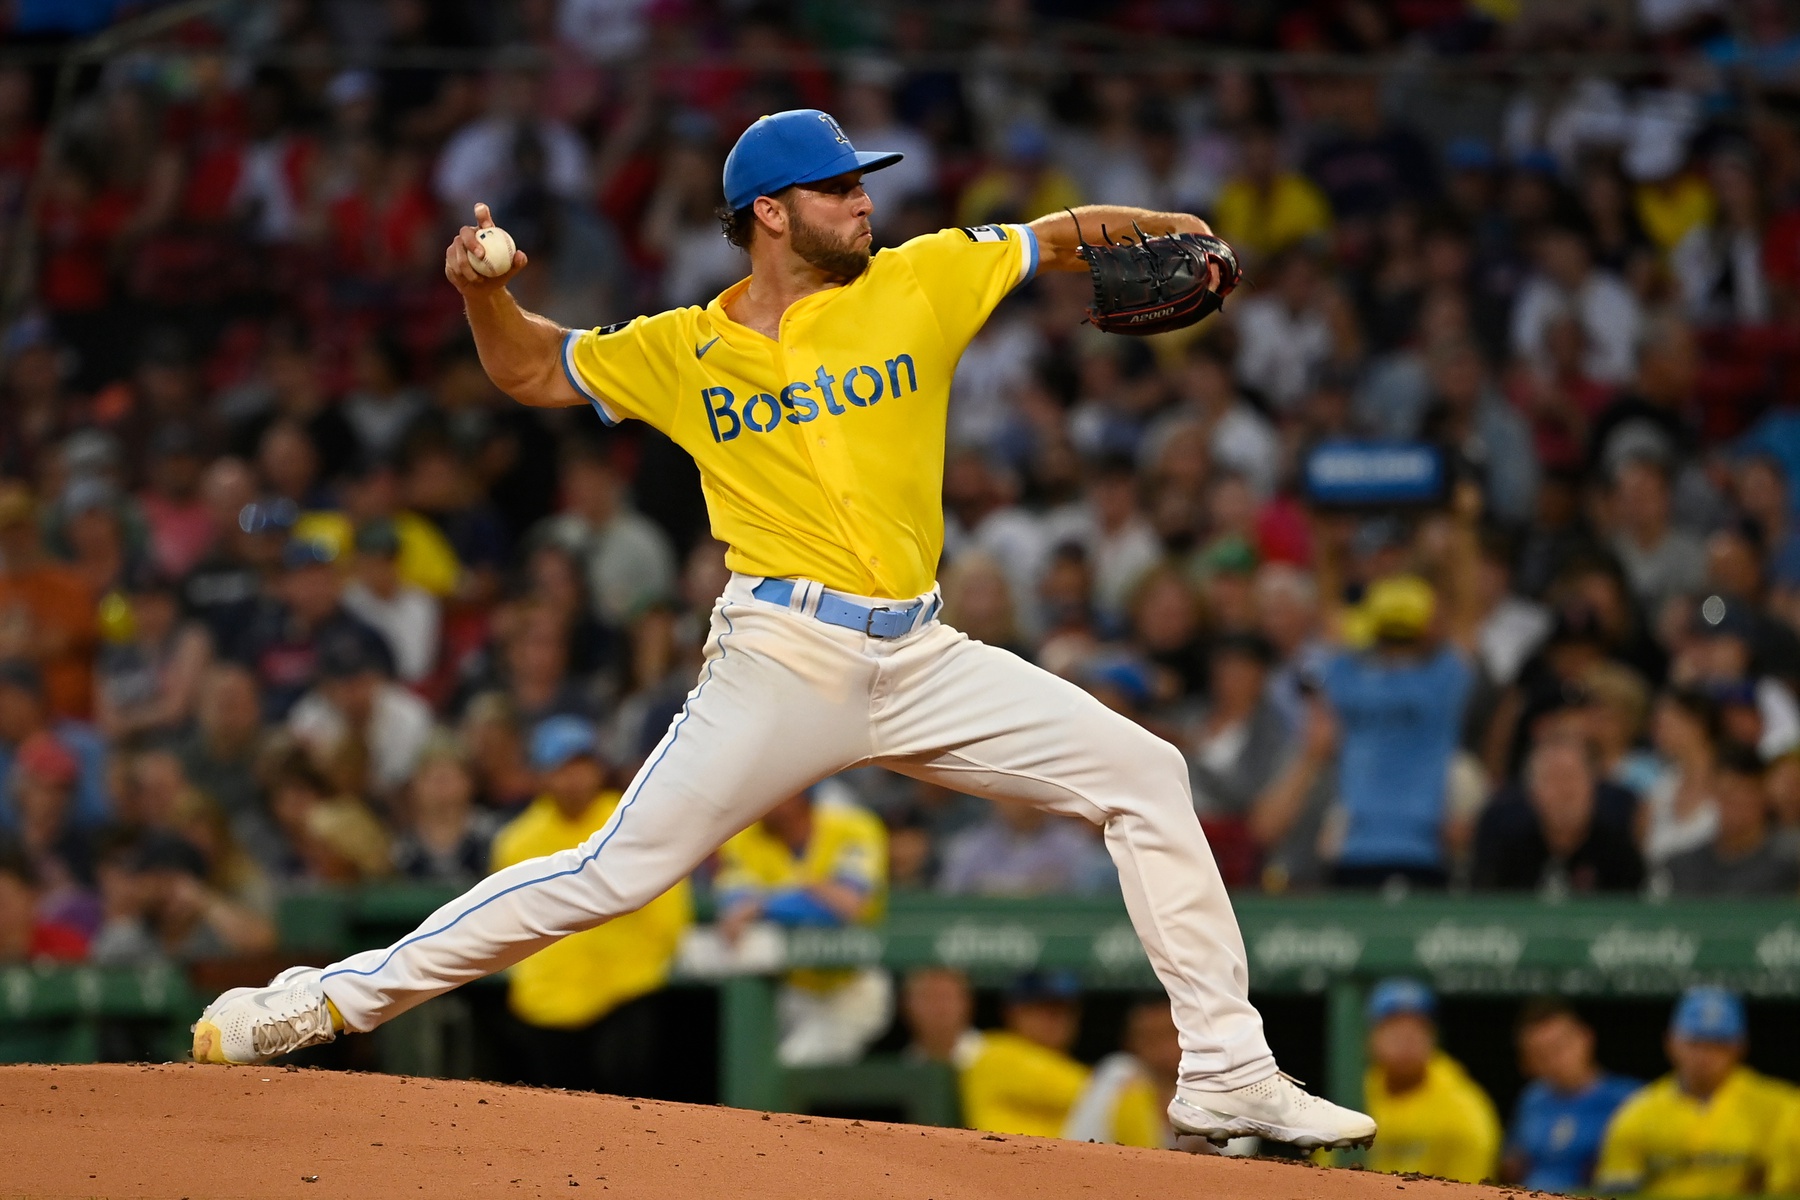 Why are the Red Sox wearing yellow and blue? Origins of uniform examined